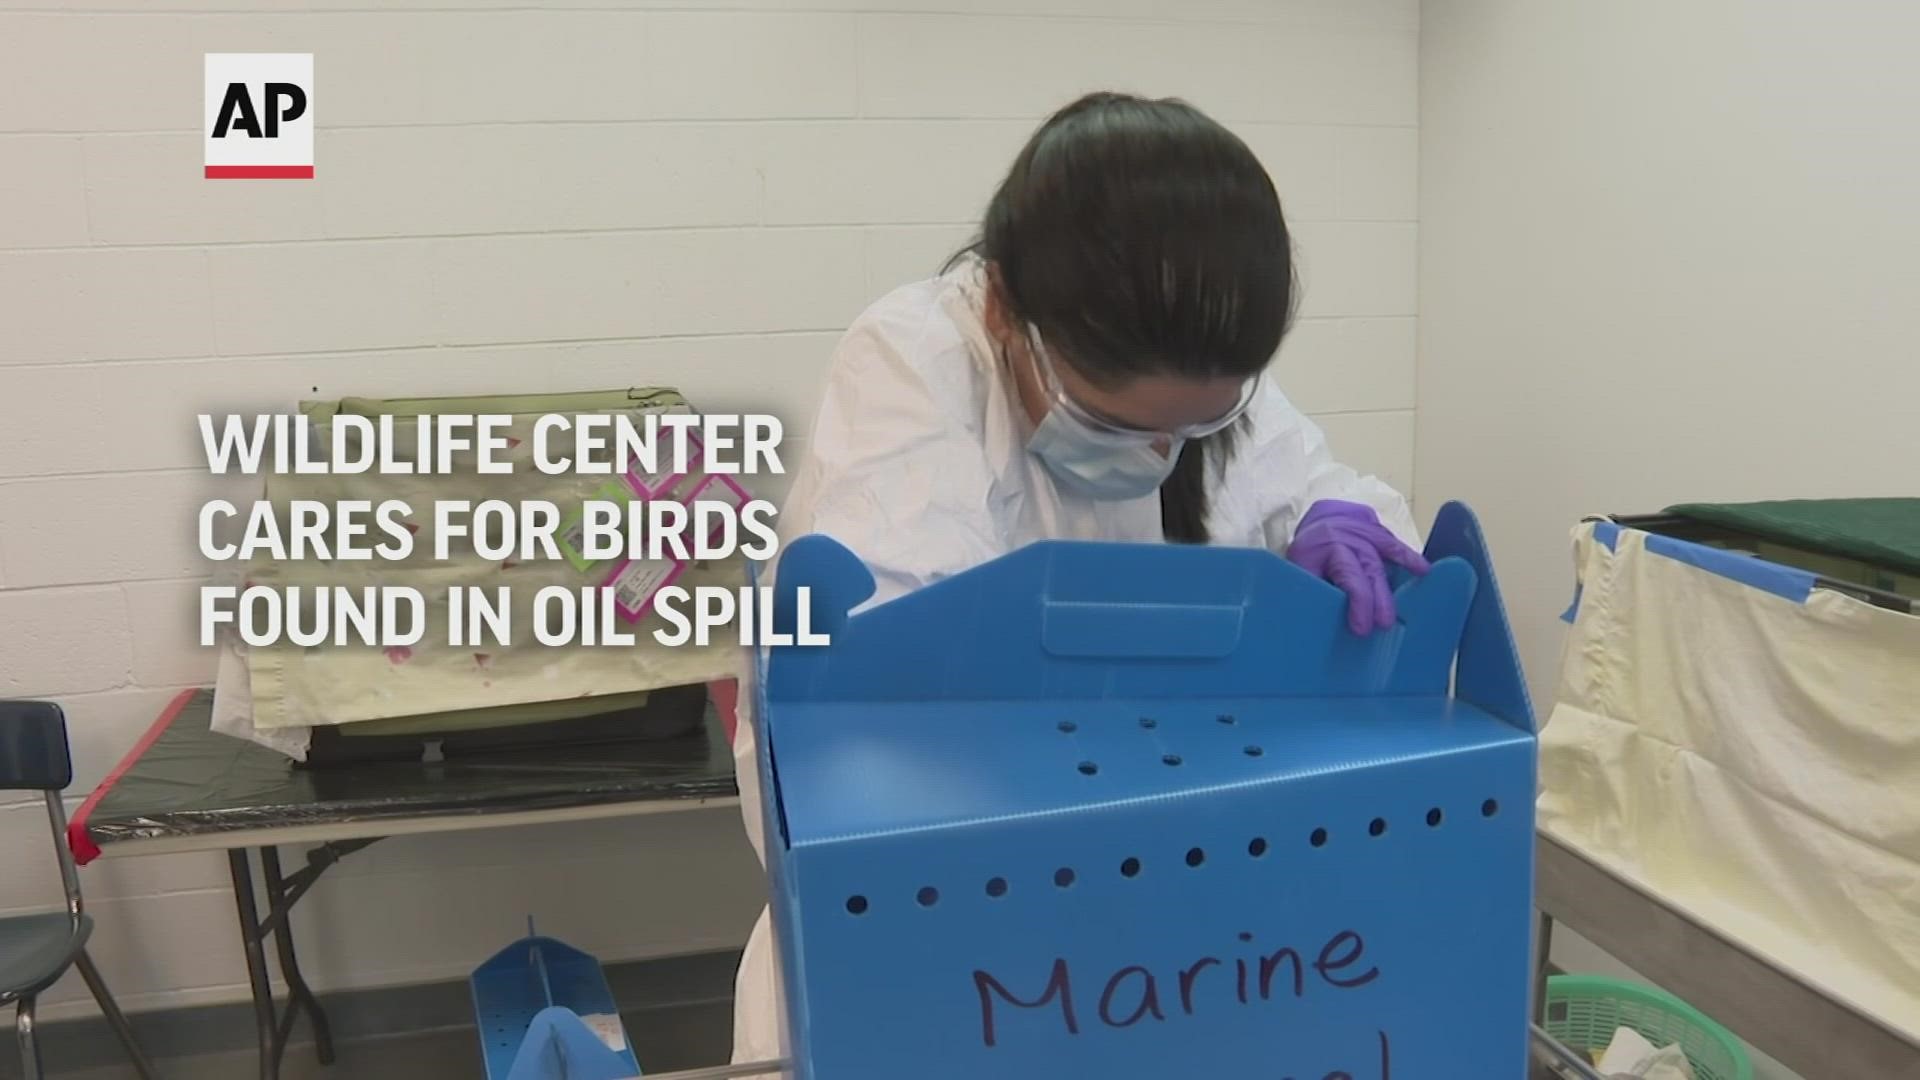 At the Oiled Wildlife Care Network treatment center in Los Angeles, staff were treating the 25 live birds that were oiled from the spill.